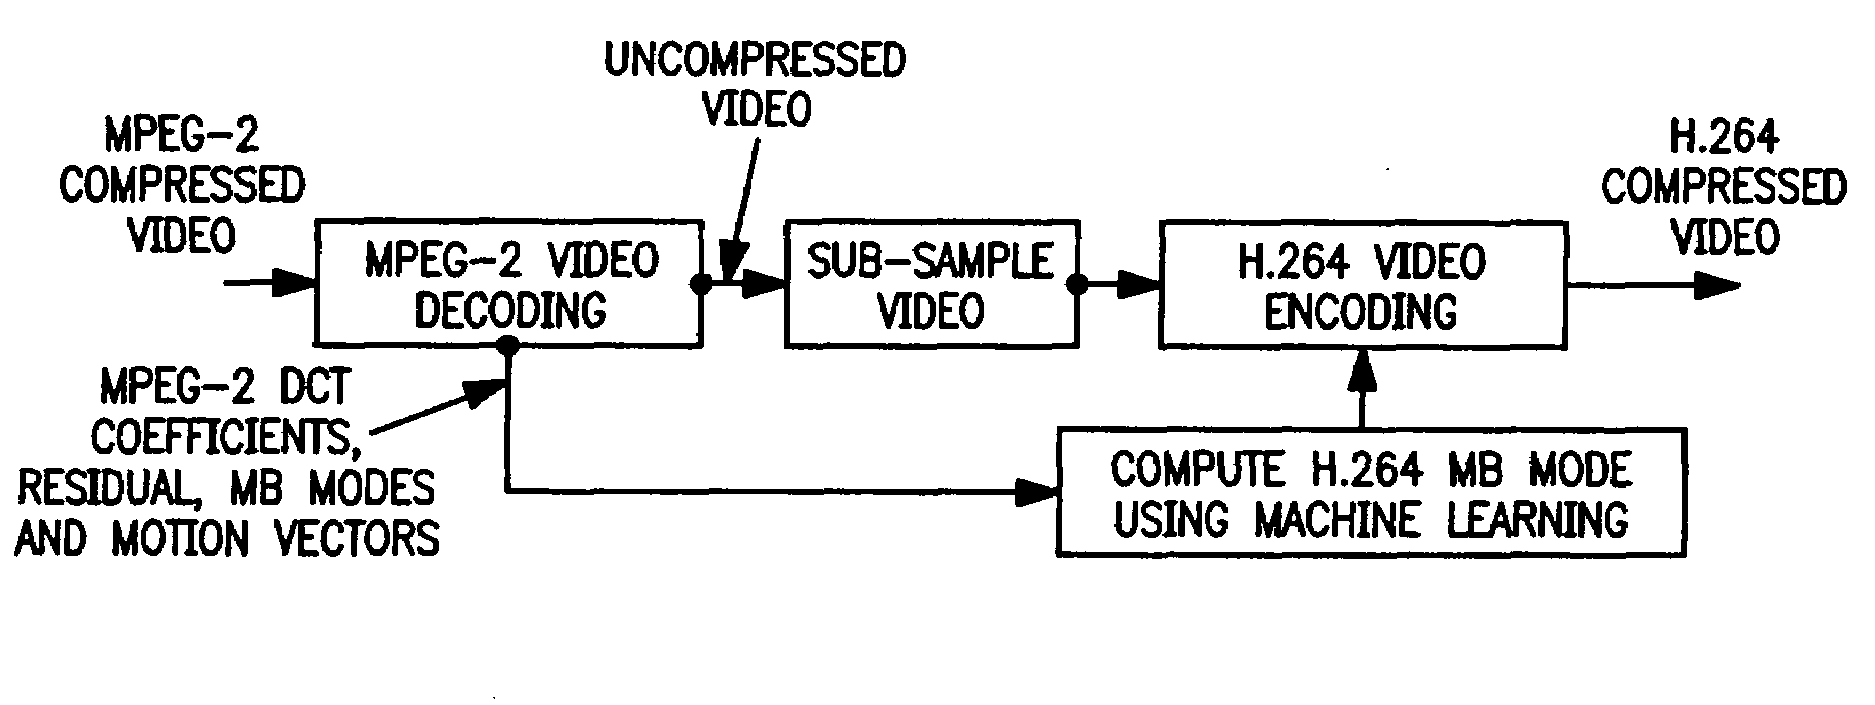 Reduced resolution video transcoding with greatly reduced complexity